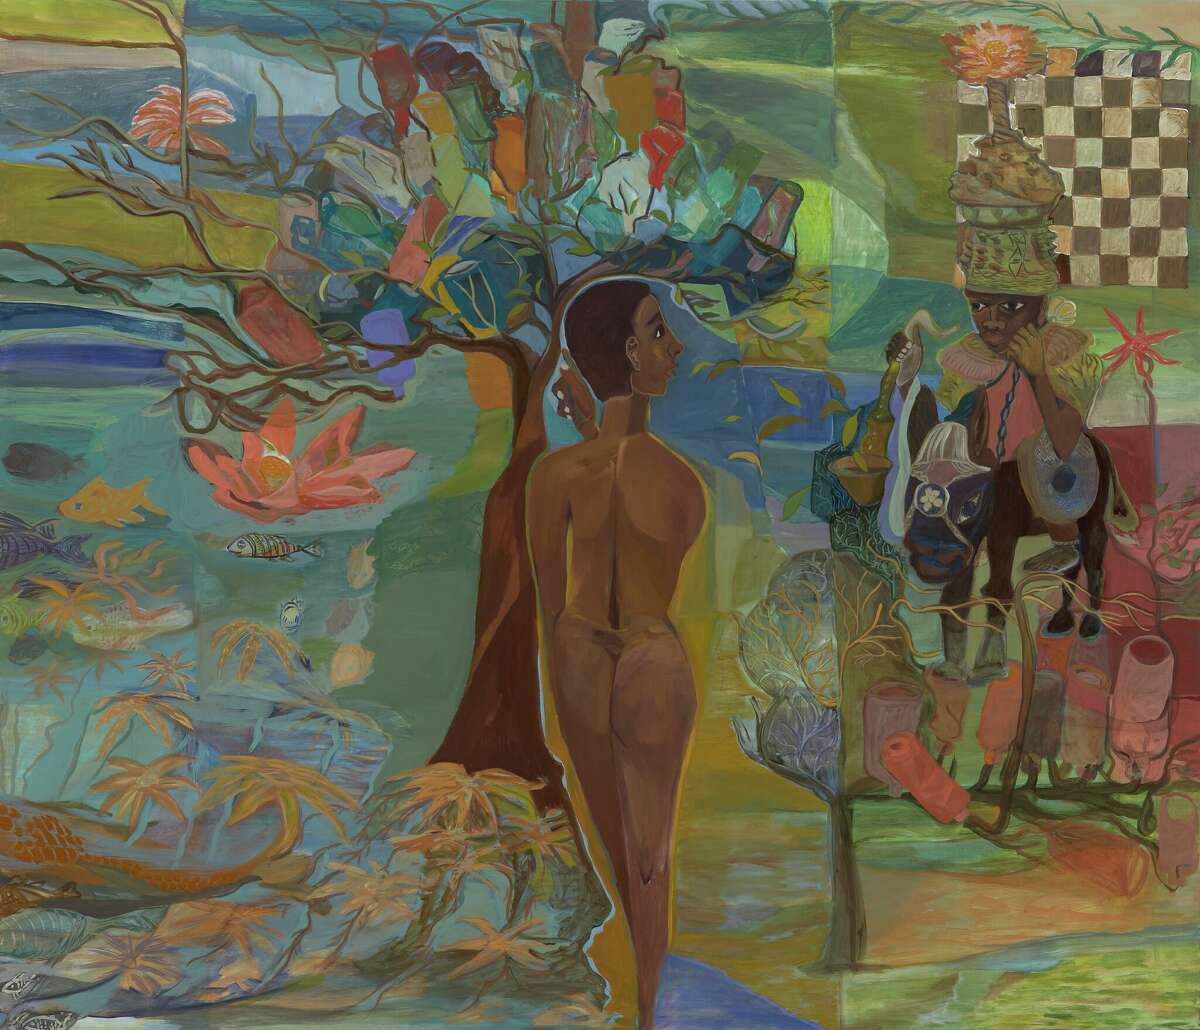 Ficre Ghebreyesus's "Nude with Bottle Tree," c.2011.Acrylic on canvas 72 x 84 in (182.9 x 213.4 cm). The piece is on display at the Venice Biennale. 